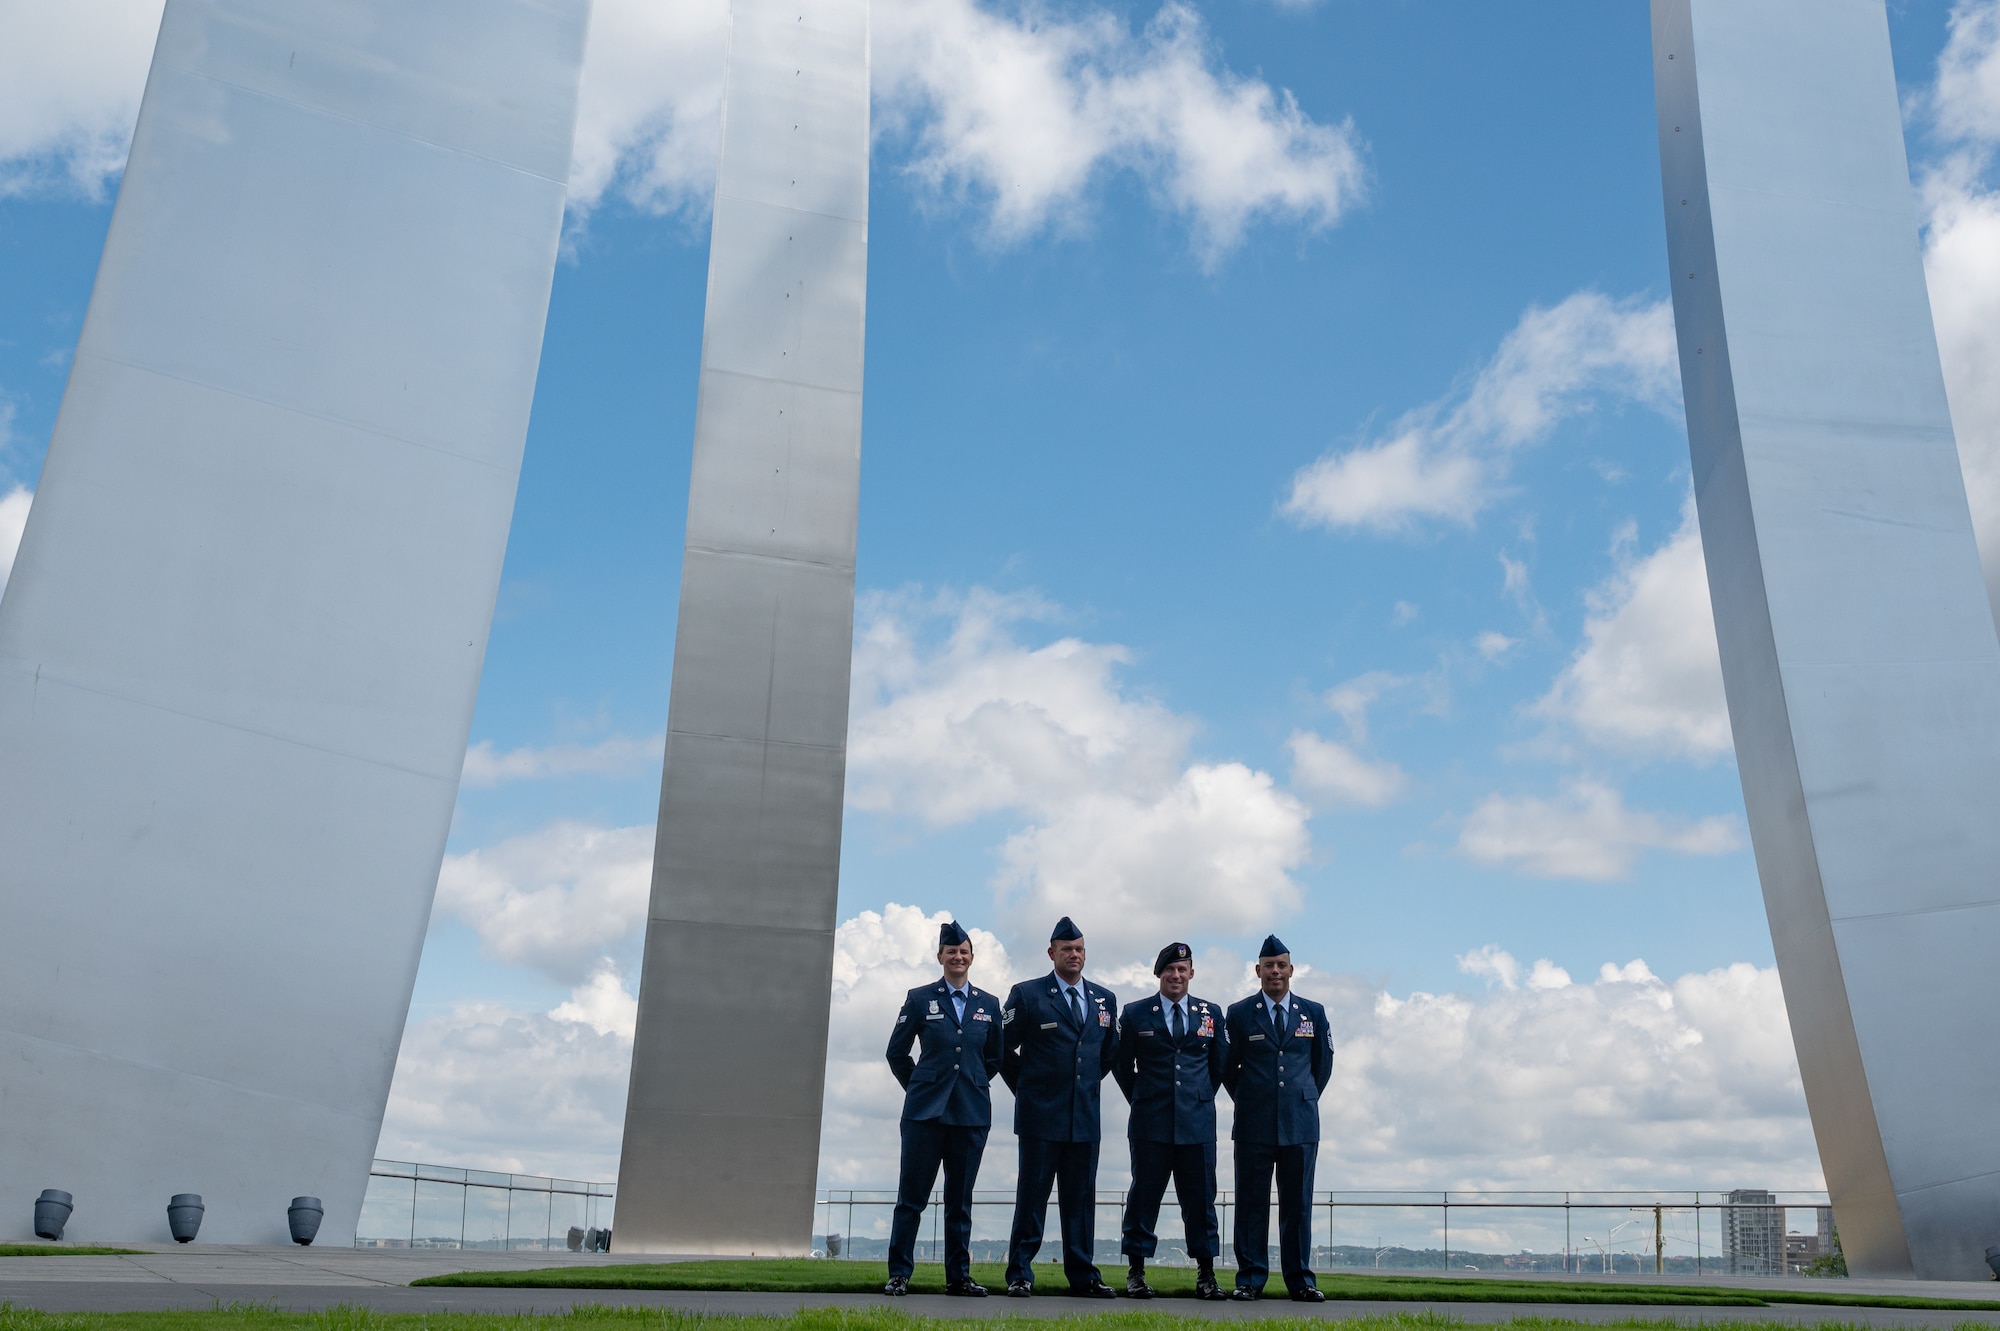 From left: U.S. Air Force Senior Airman Kristina L. Schneider, of the 179th Airlift Wing, Ohio National Guard; Tech Sgt. Brett A. Yoakum, of the 164th Airlift Wing, Tennessee National Guard; Master Sgt. Daniel P. Keller, of the 124th Fighter Wing, Idaho National Guard; and Senior Master Sgt. Jonathan Sotomayor, of the 125th Fighter Squadron, Florida National Guard, pose for a photo at the Air Force Memorial, Arlington, Virginia, on Aug. 22, 2022.